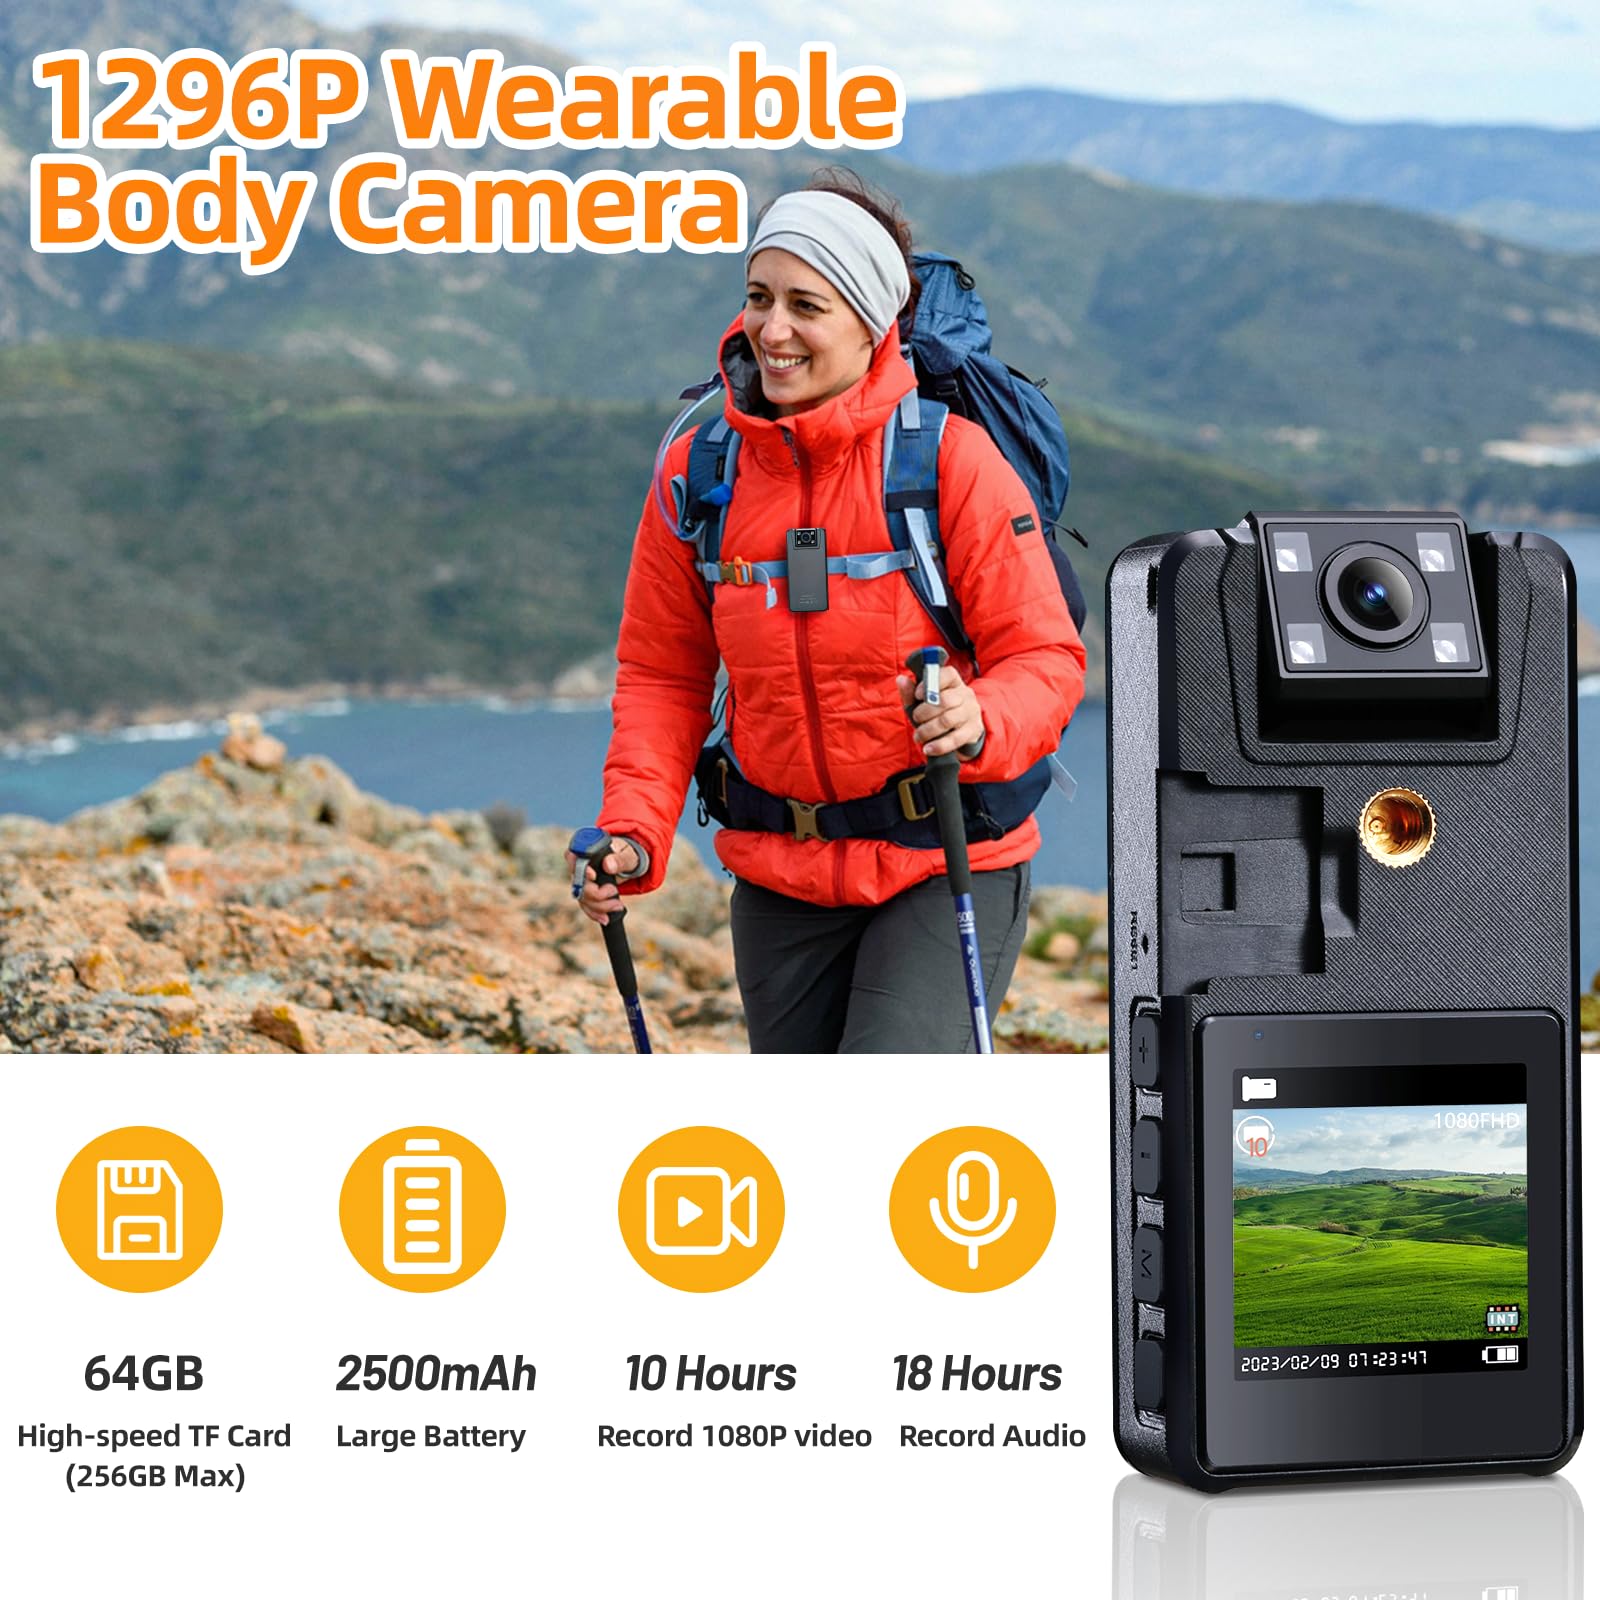 Hoestr 64GB Body Camera, 1296P Body Cam (2500mAh) with IR Night Vision, 180° Rotatable Lens and 3 Sturdy Clips, Camcorder with Audio and Video Recording, Ideal for Police Civilians Hikers Cyclists